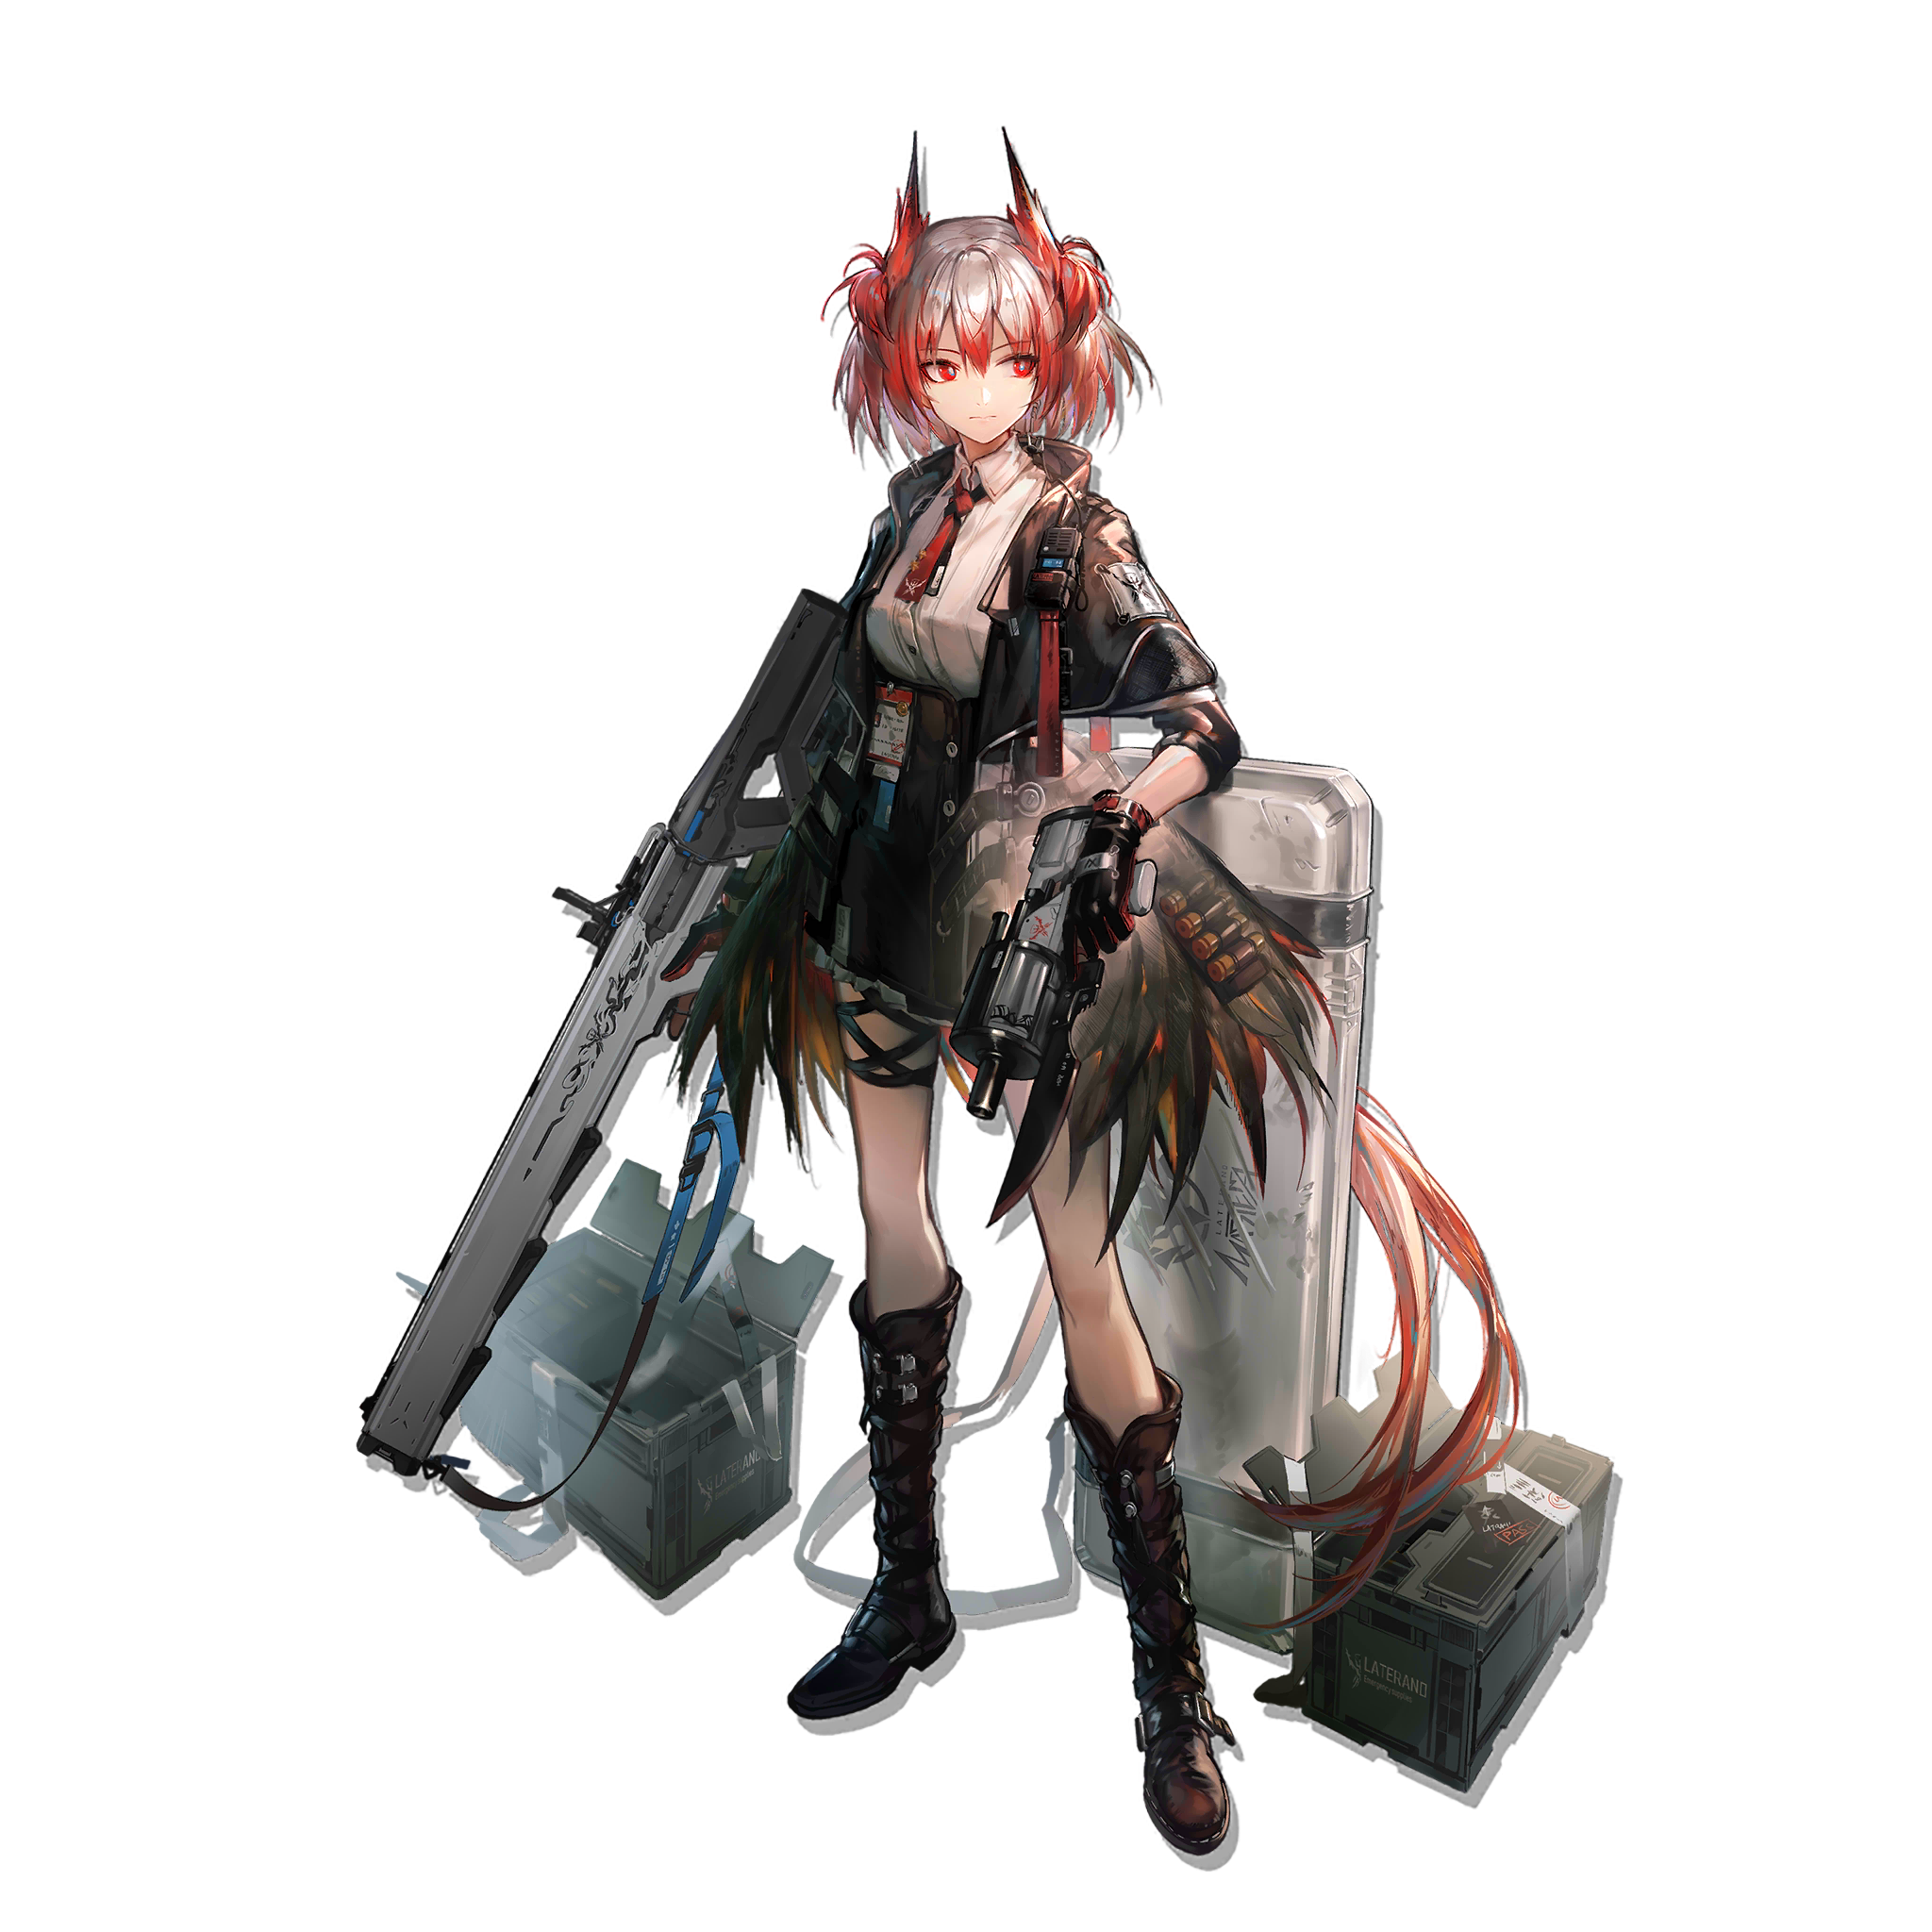 Pack 菲亚梅塔 skin 0 0.png